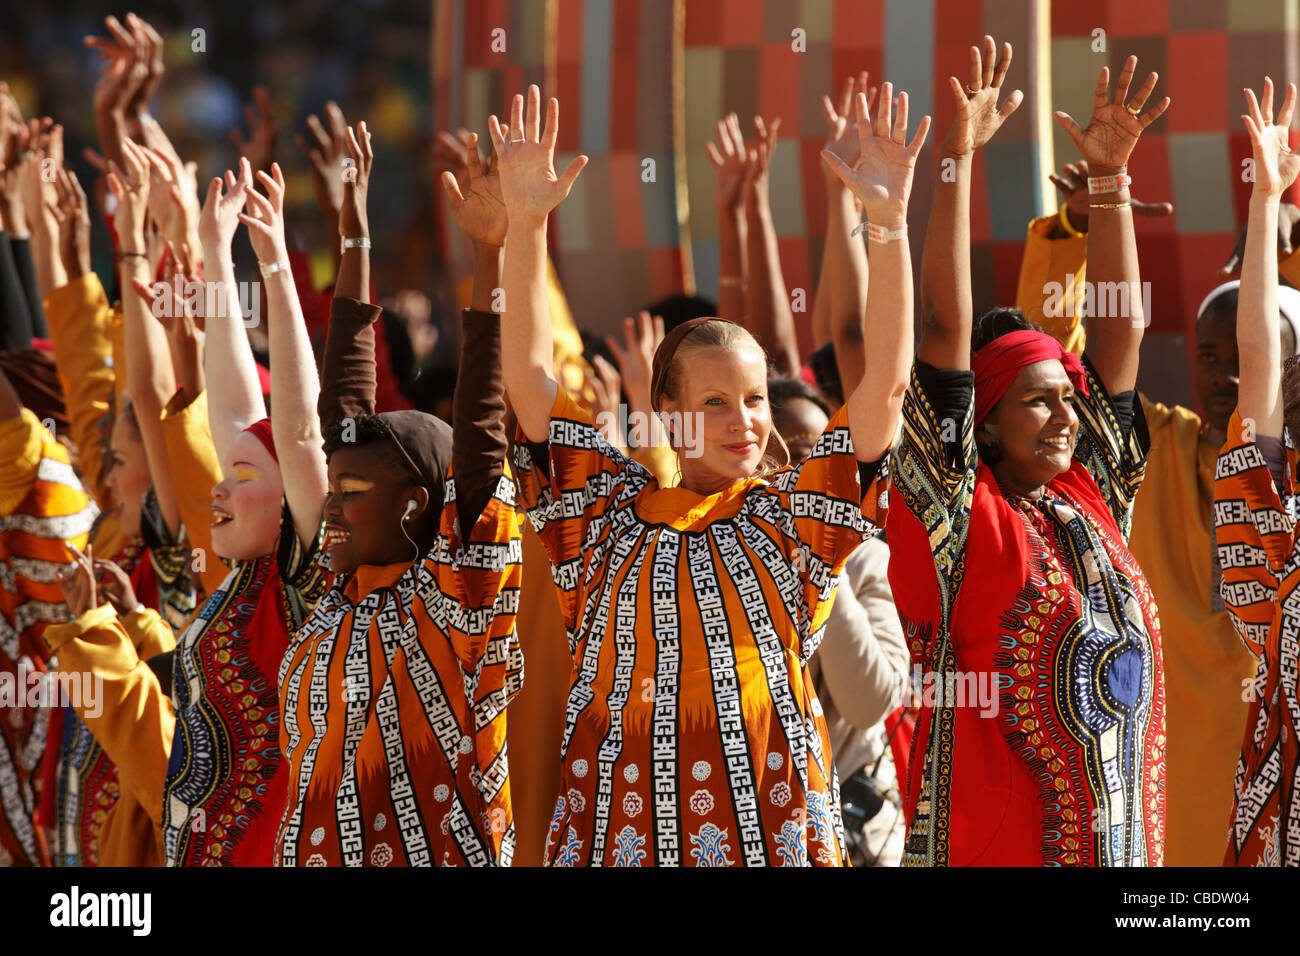 Performers raise their arms during the opening ceremony of the 2010 FIFA World Cup soccer tournament at Soccer City Stadium. Stock Photo